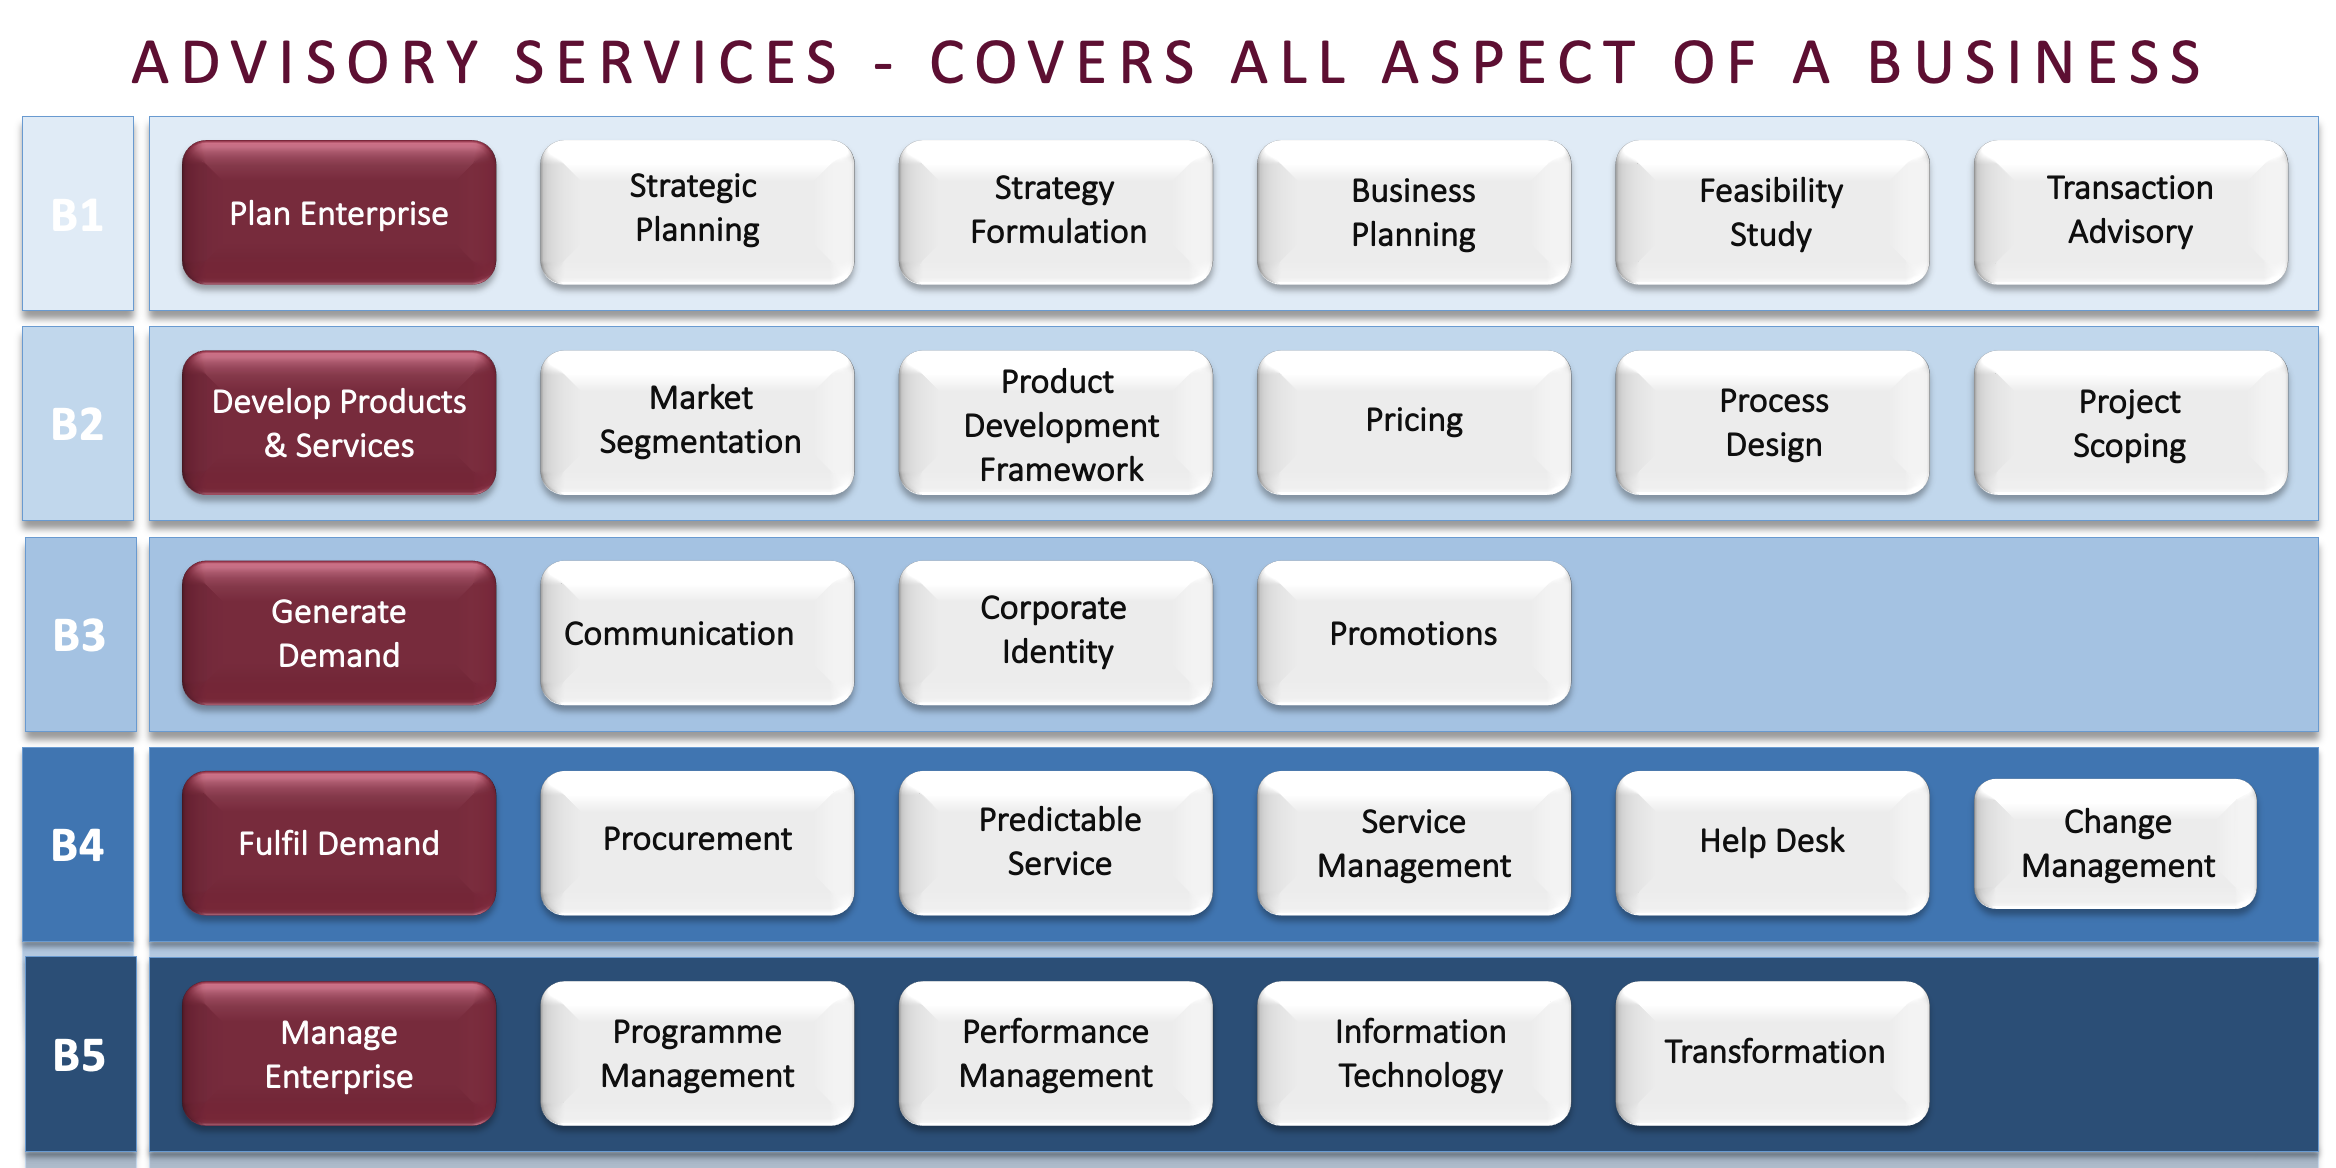 ADVISORY SERVICES: COVERS ALL ASPECT OF A BUSINESS